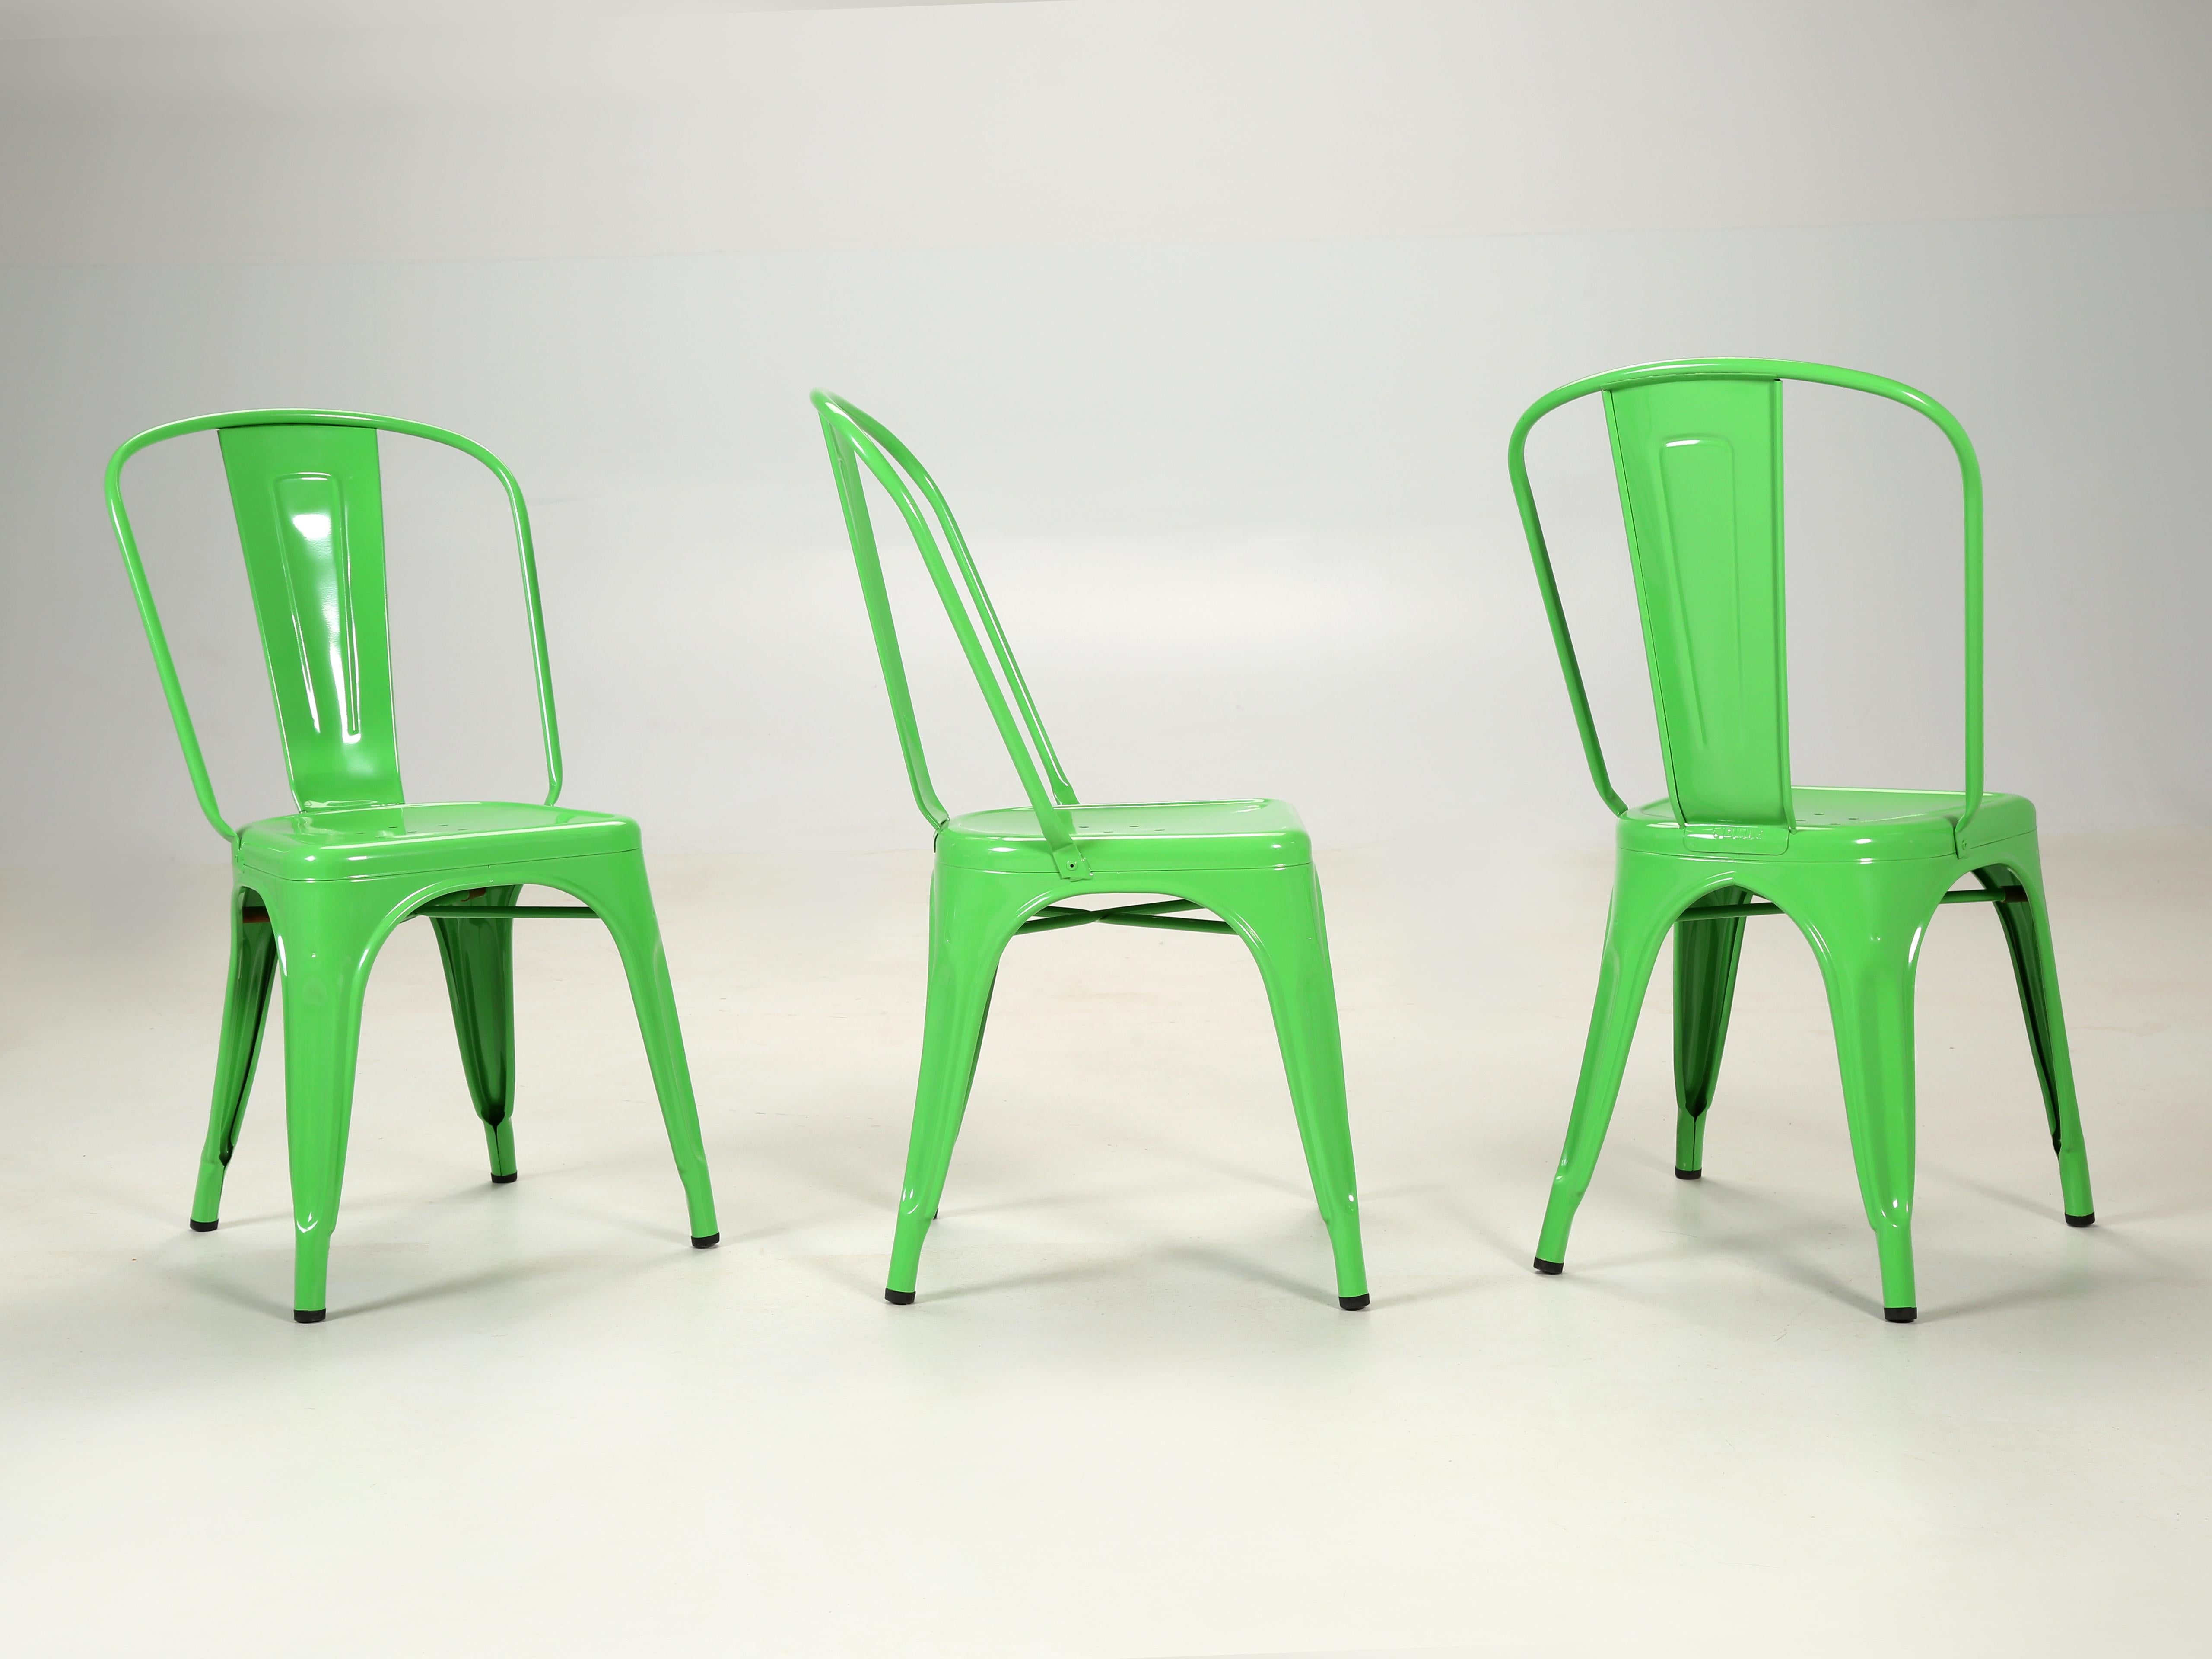 Industrial Genuine French Bright Green Tolix Set '6' Steel Chairs, Cosmetic Flaws For Sale